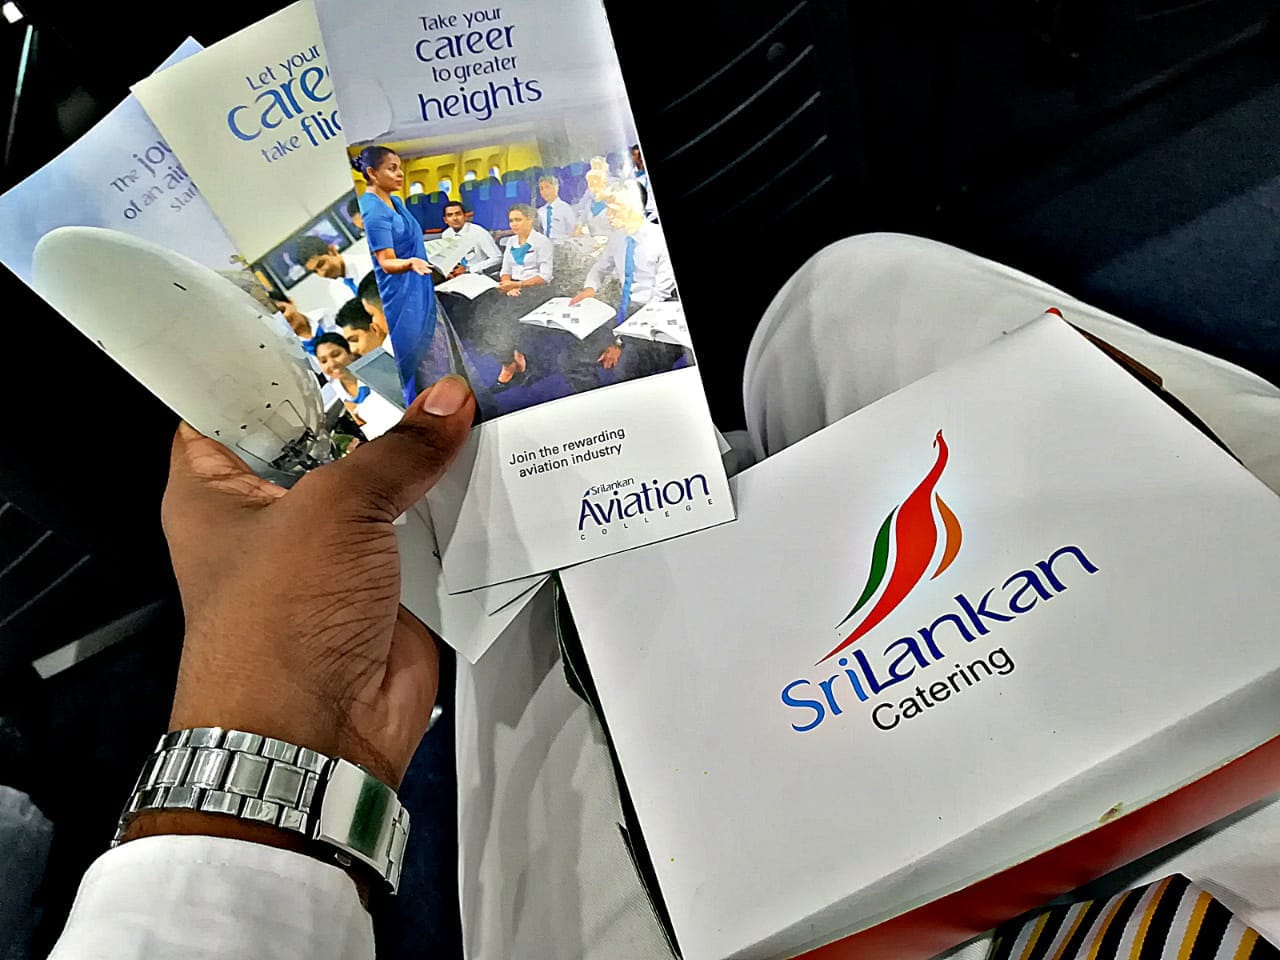 The SriLankan flyers in a student’s hand